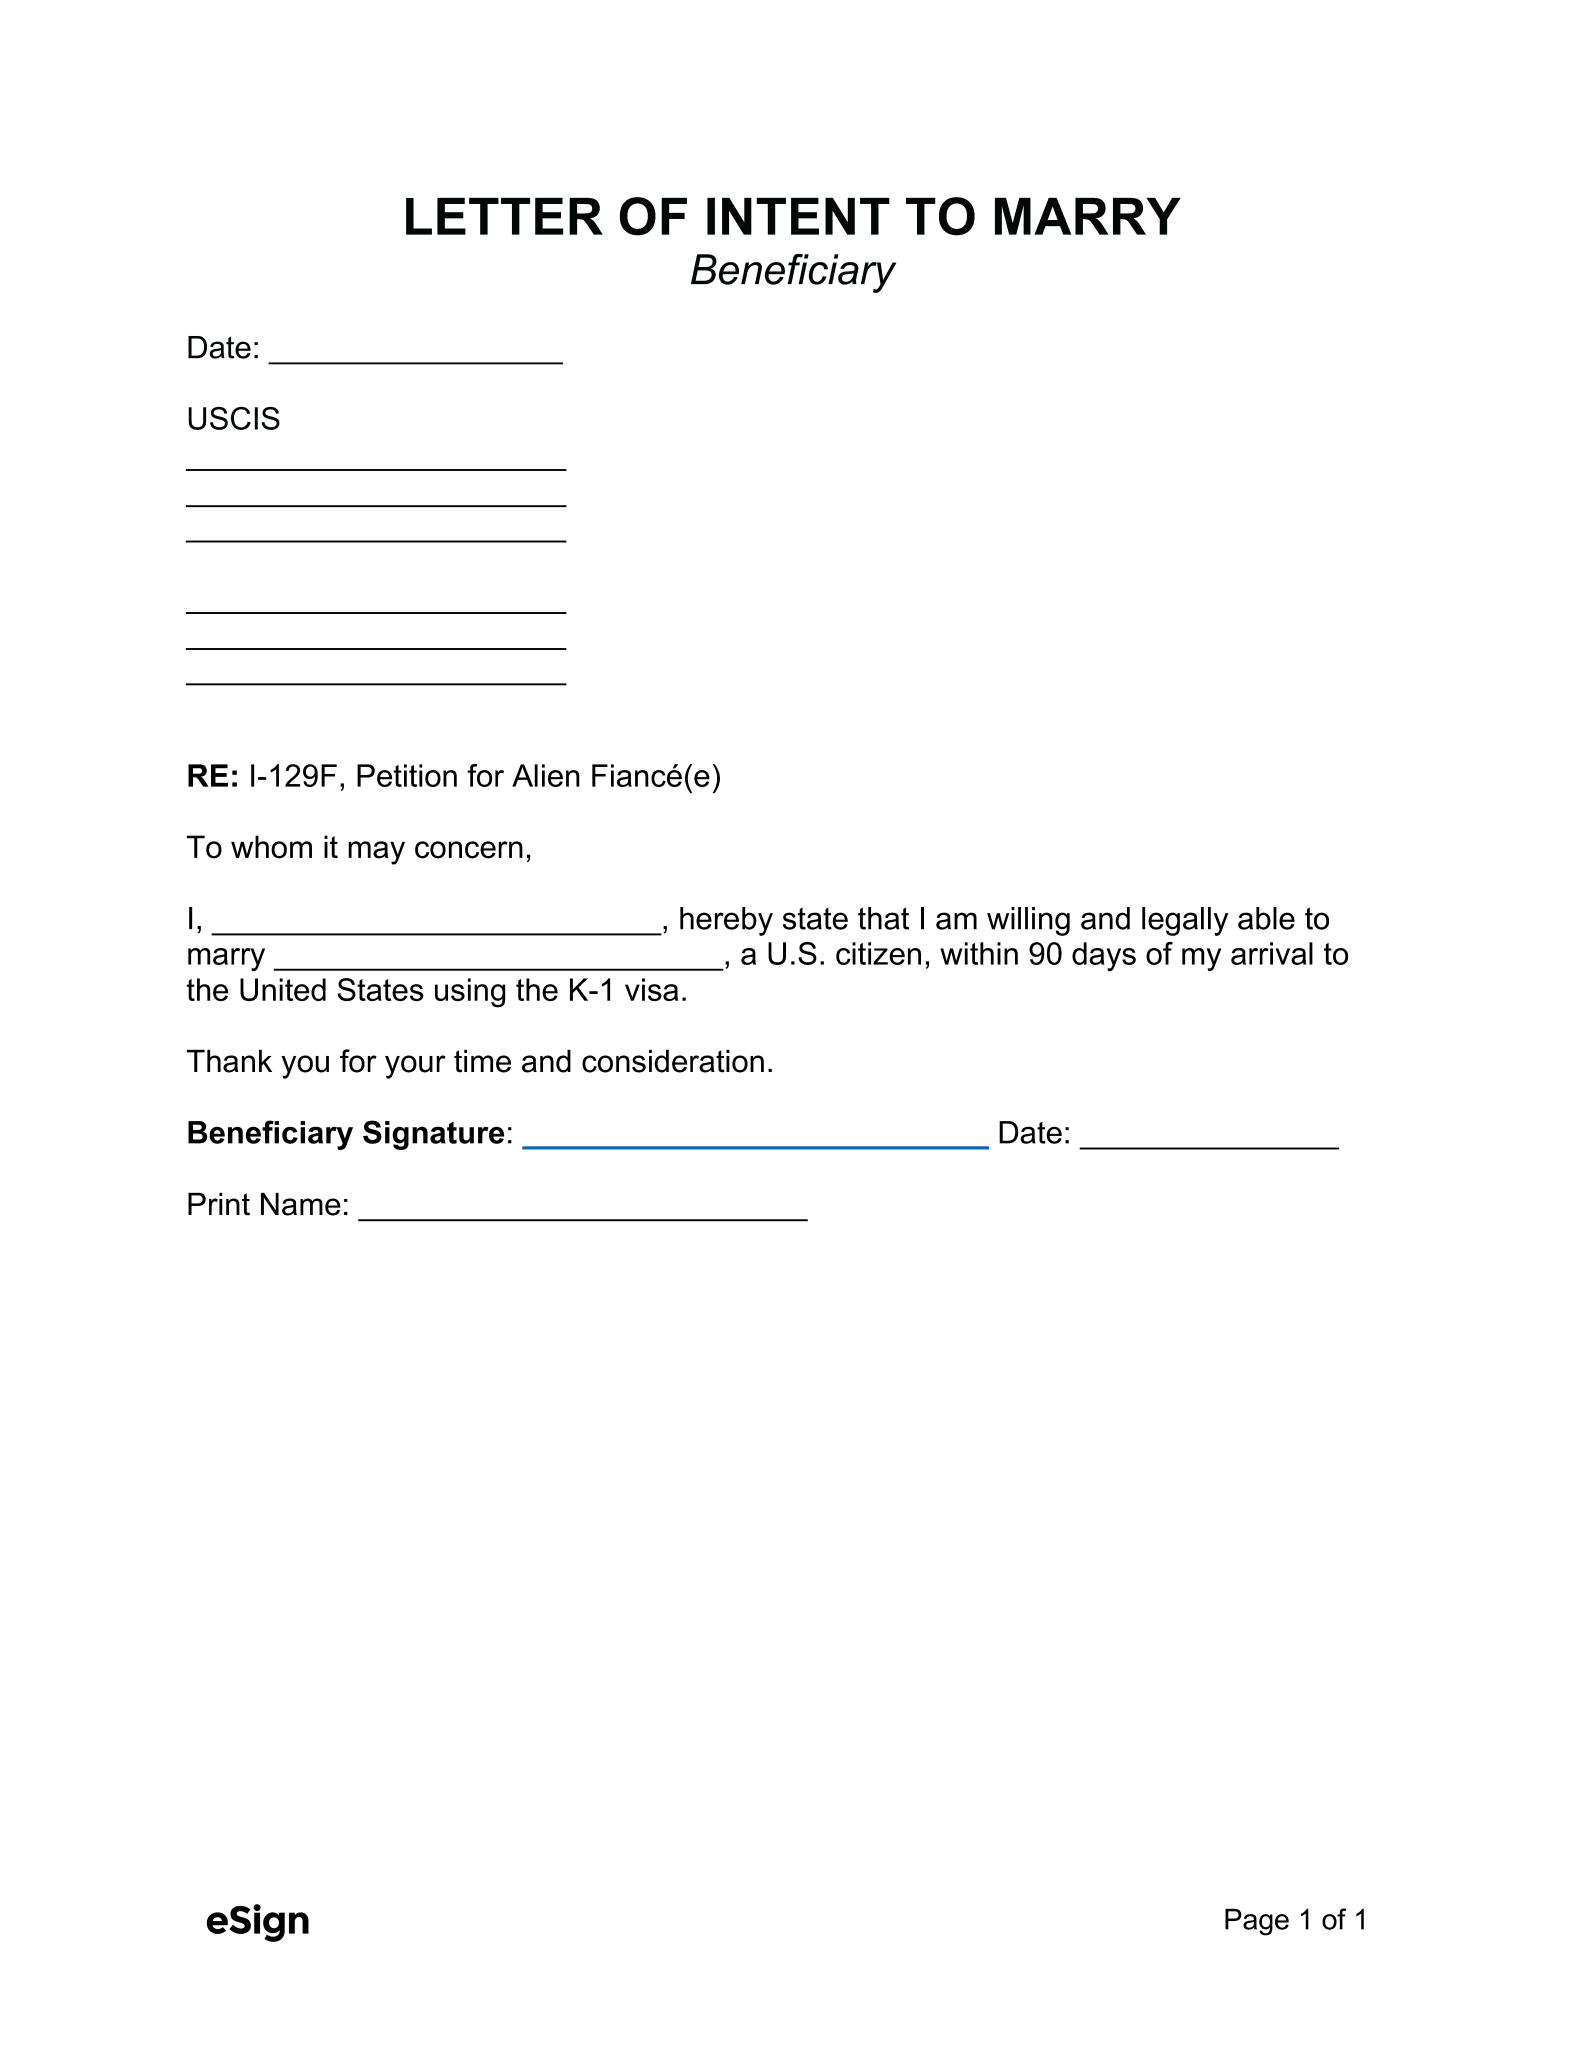 Free Letter of Intent to Marry (within 90 Days) | PDF | Word